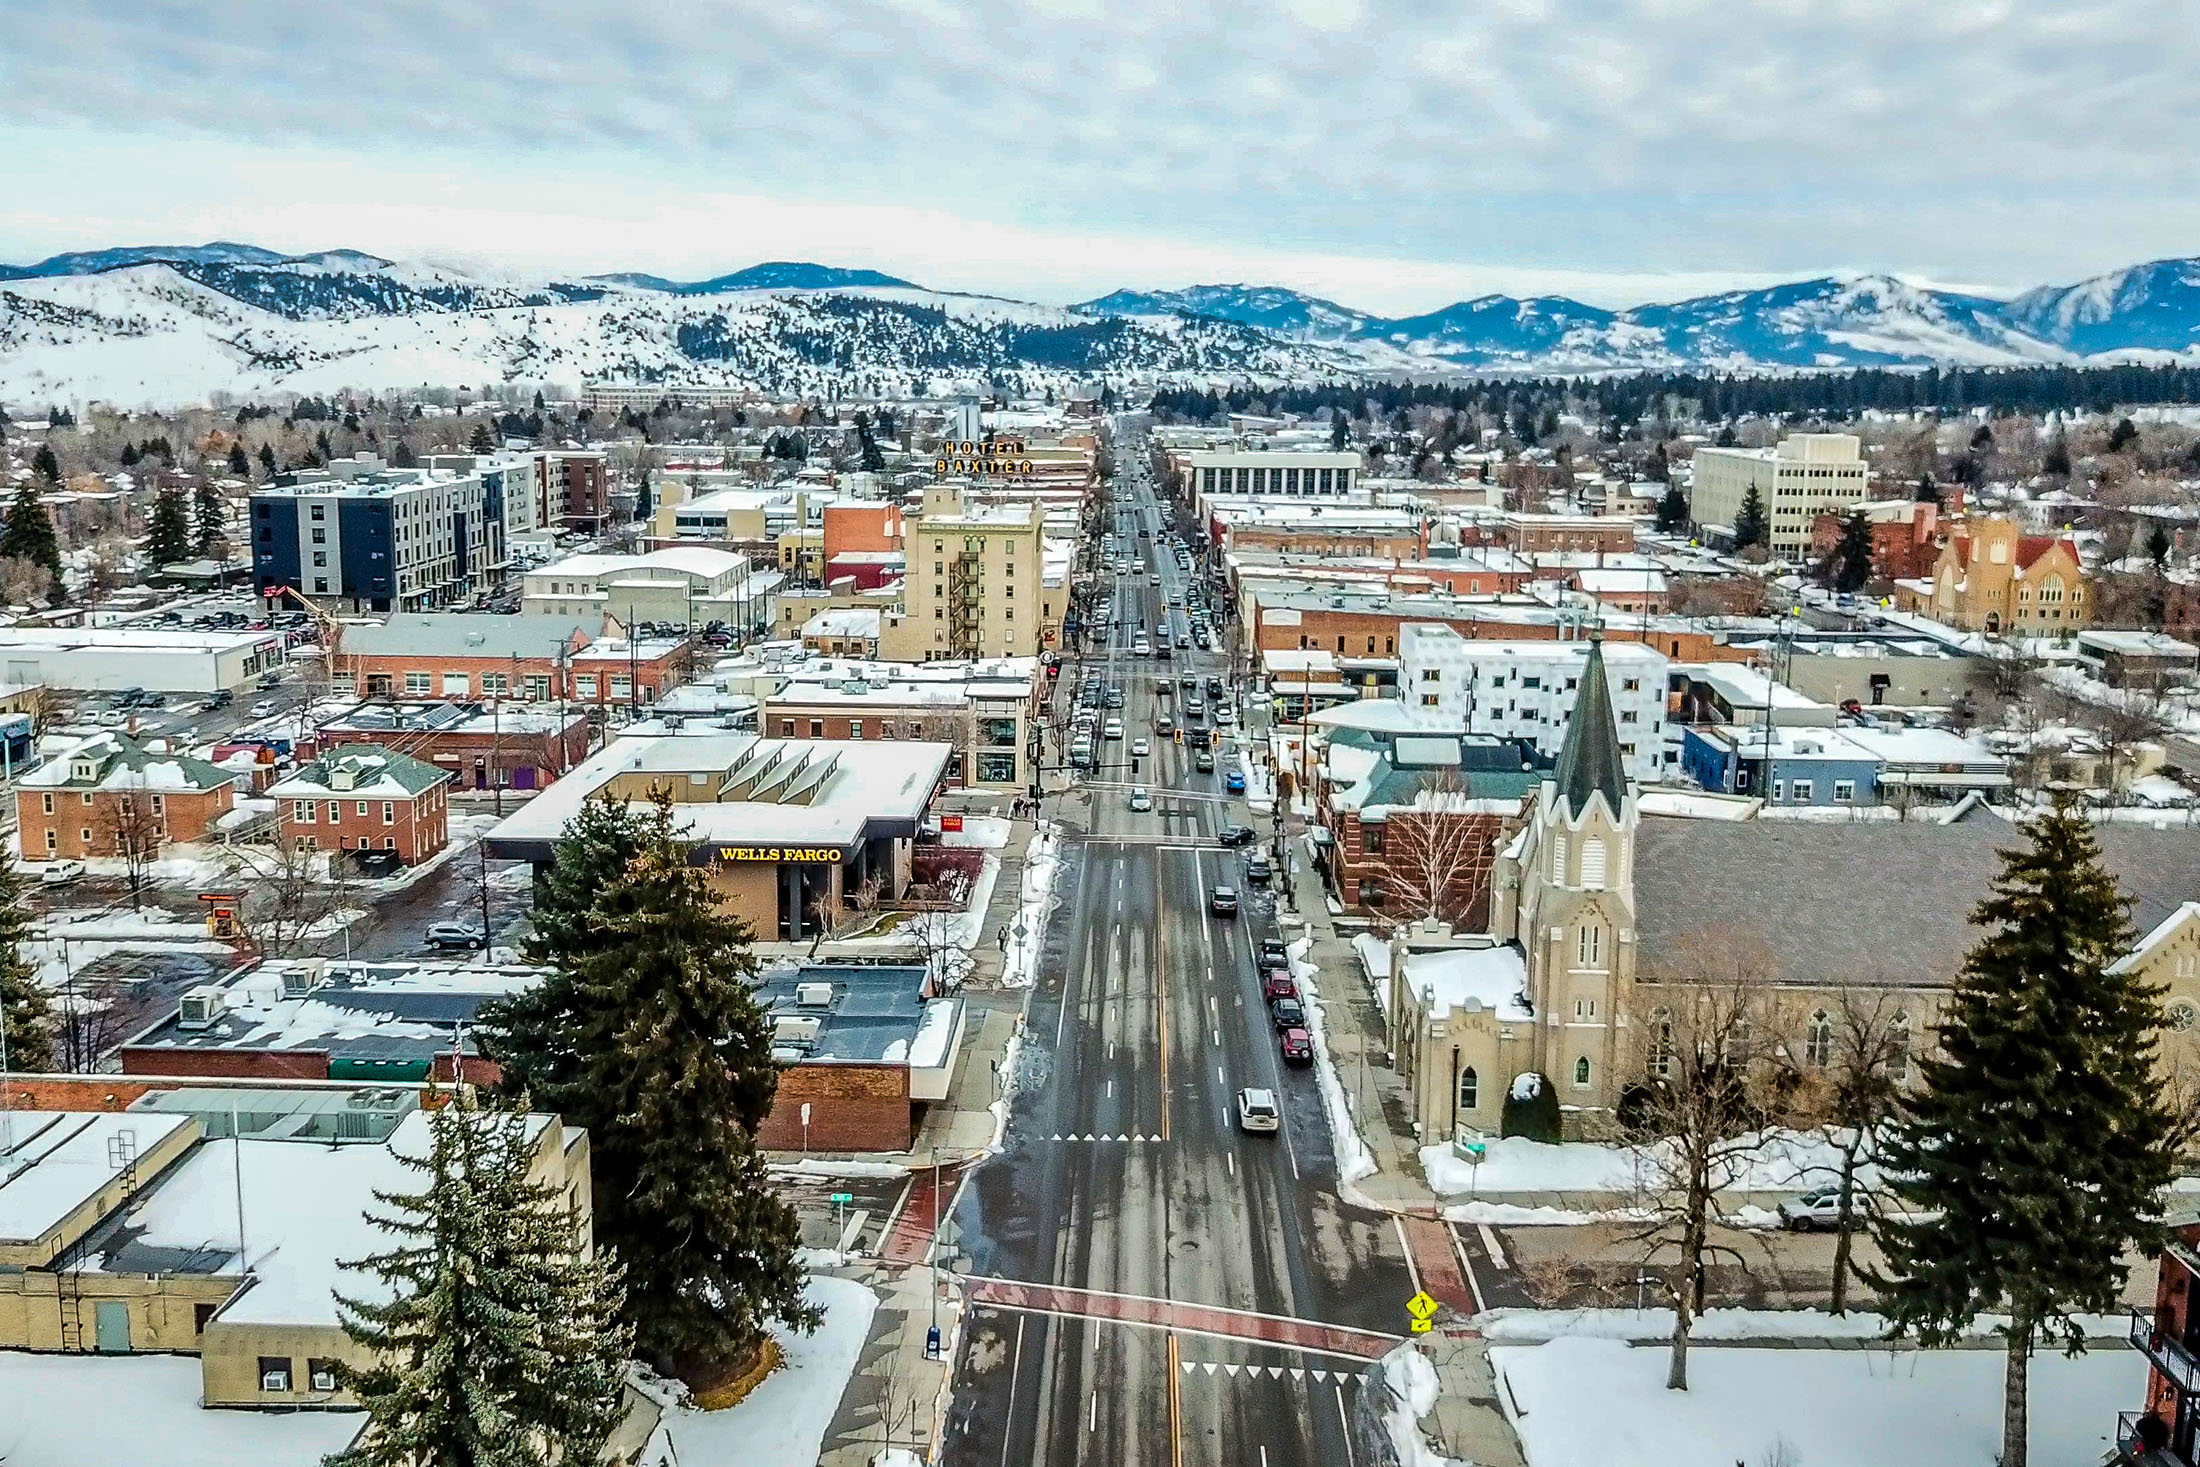 Main Street in Bozeman, Montana. Prices in Bozeman jumped 16% year-over-year.